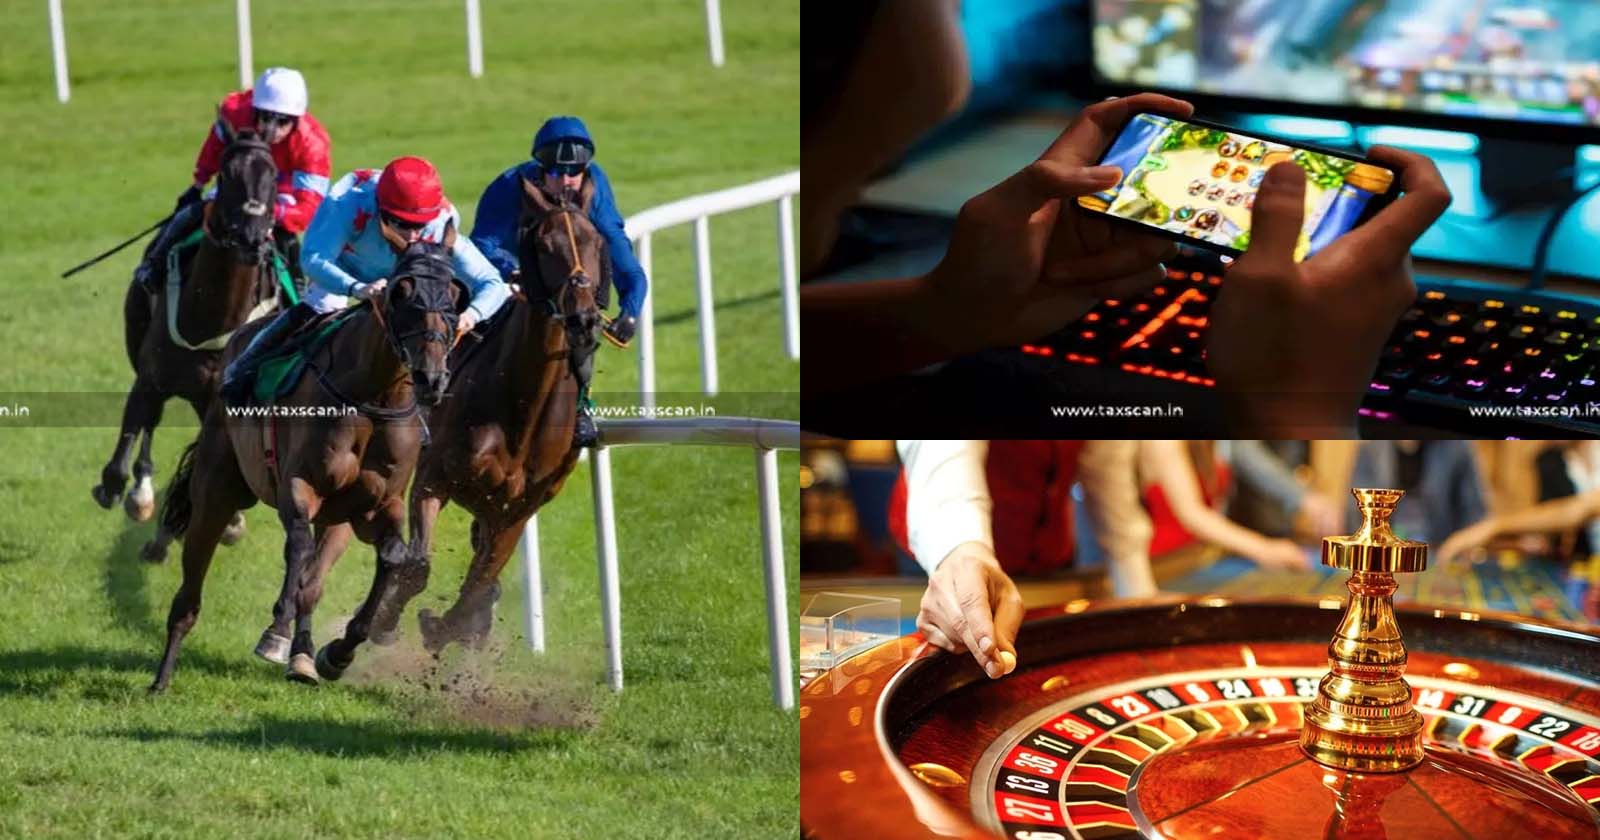 GST Council - GST - GST Council likely to Meet on August 2 to Cover Issues of Online Gaming - Casinos - Horse Racing via Video Conferencing - Taxscan